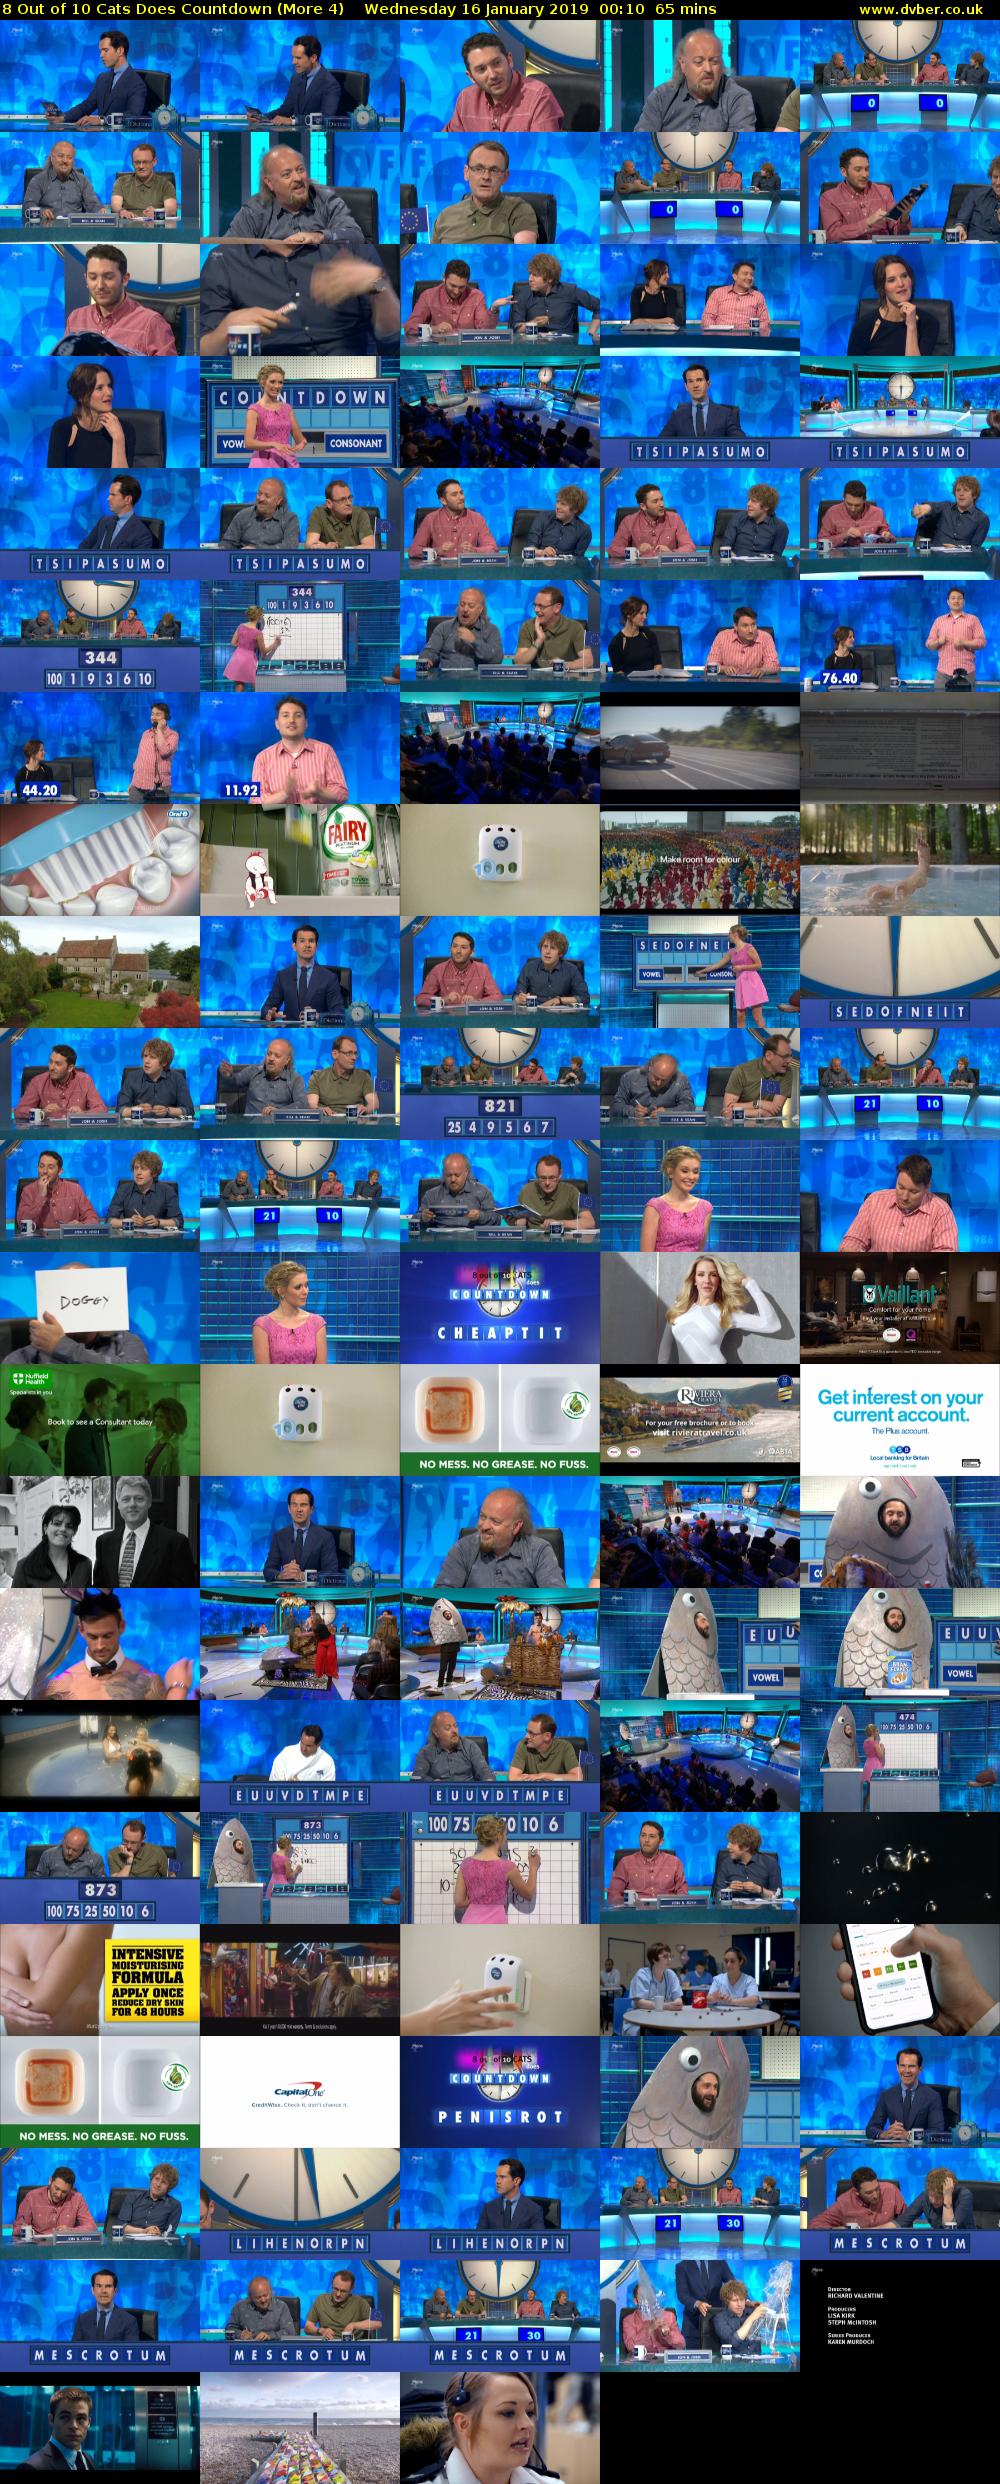 8 Out of 10 Cats Does Countdown (More 4) Wednesday 16 January 2019 00:10 - 01:15